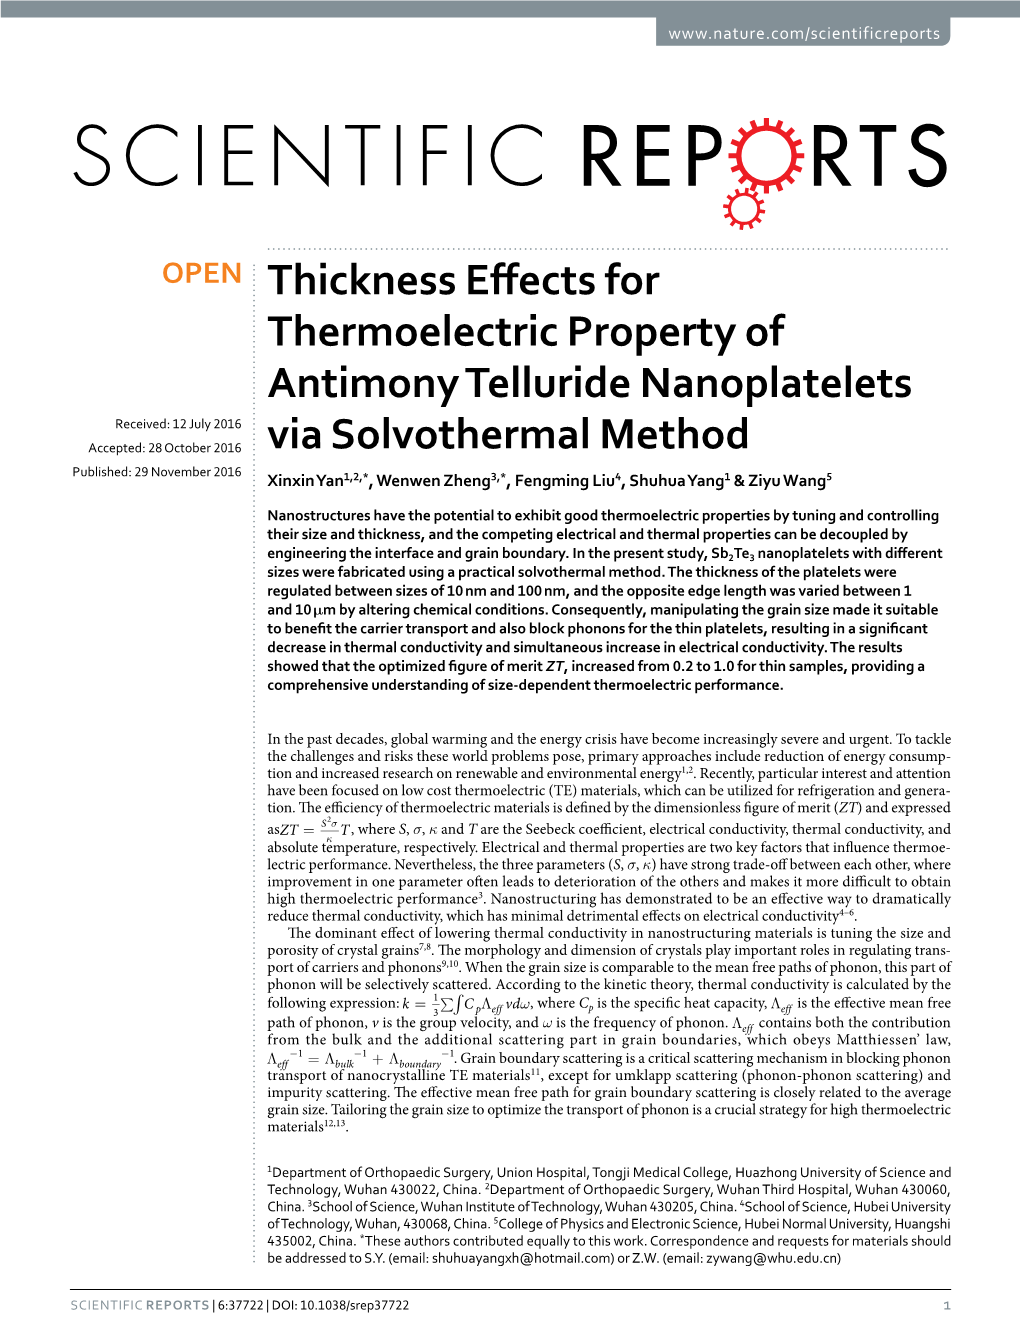 Thickness Effects for Thermoelectric Property of Antimony Telluride Nanoplatelets Via Solvothermal Method